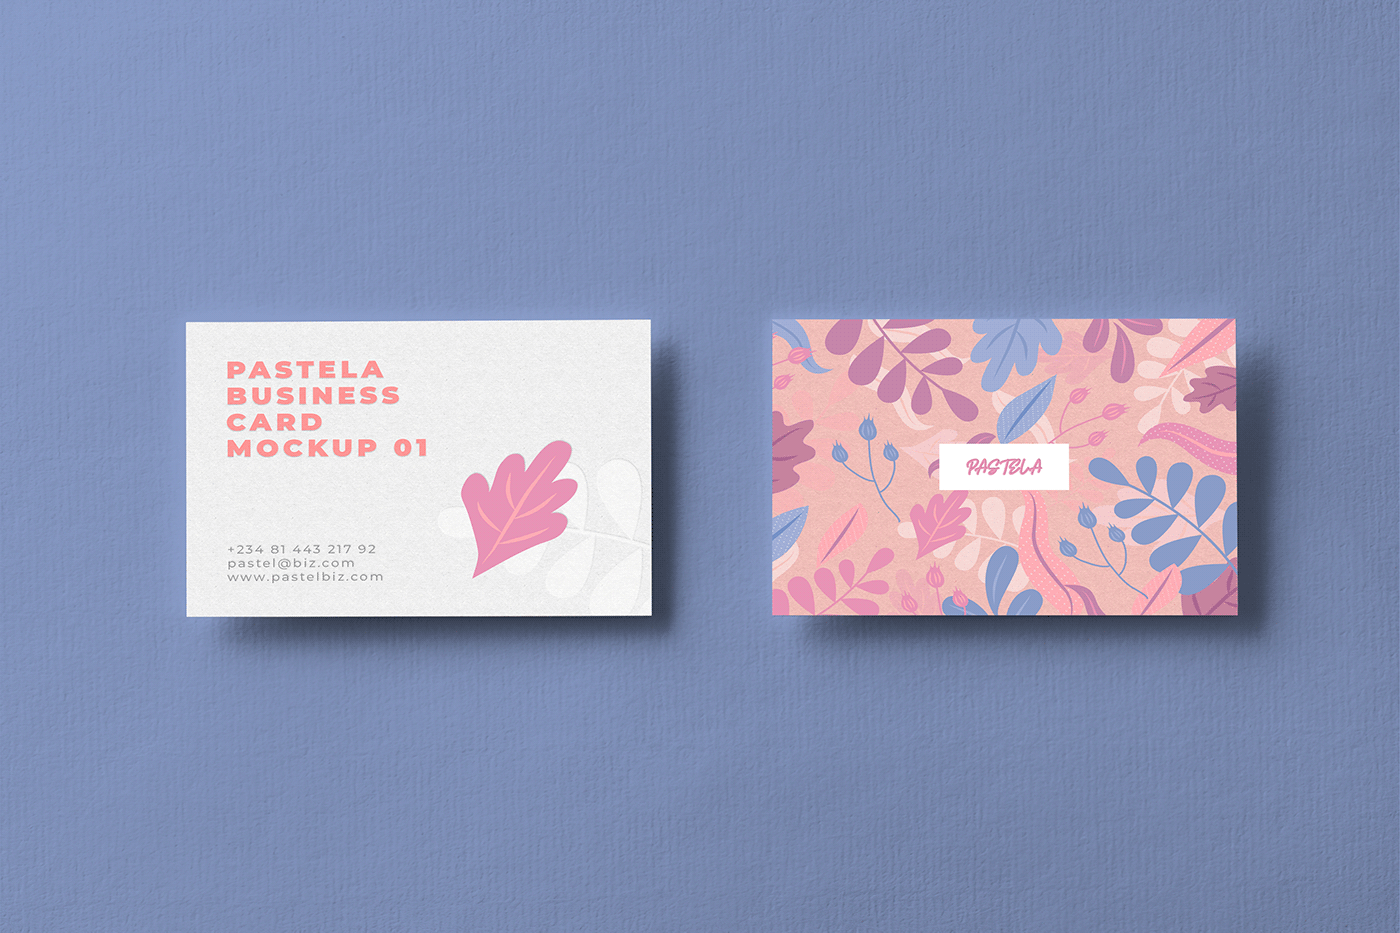 Freebies Mockups: Business Card Mockup Collection Free Download